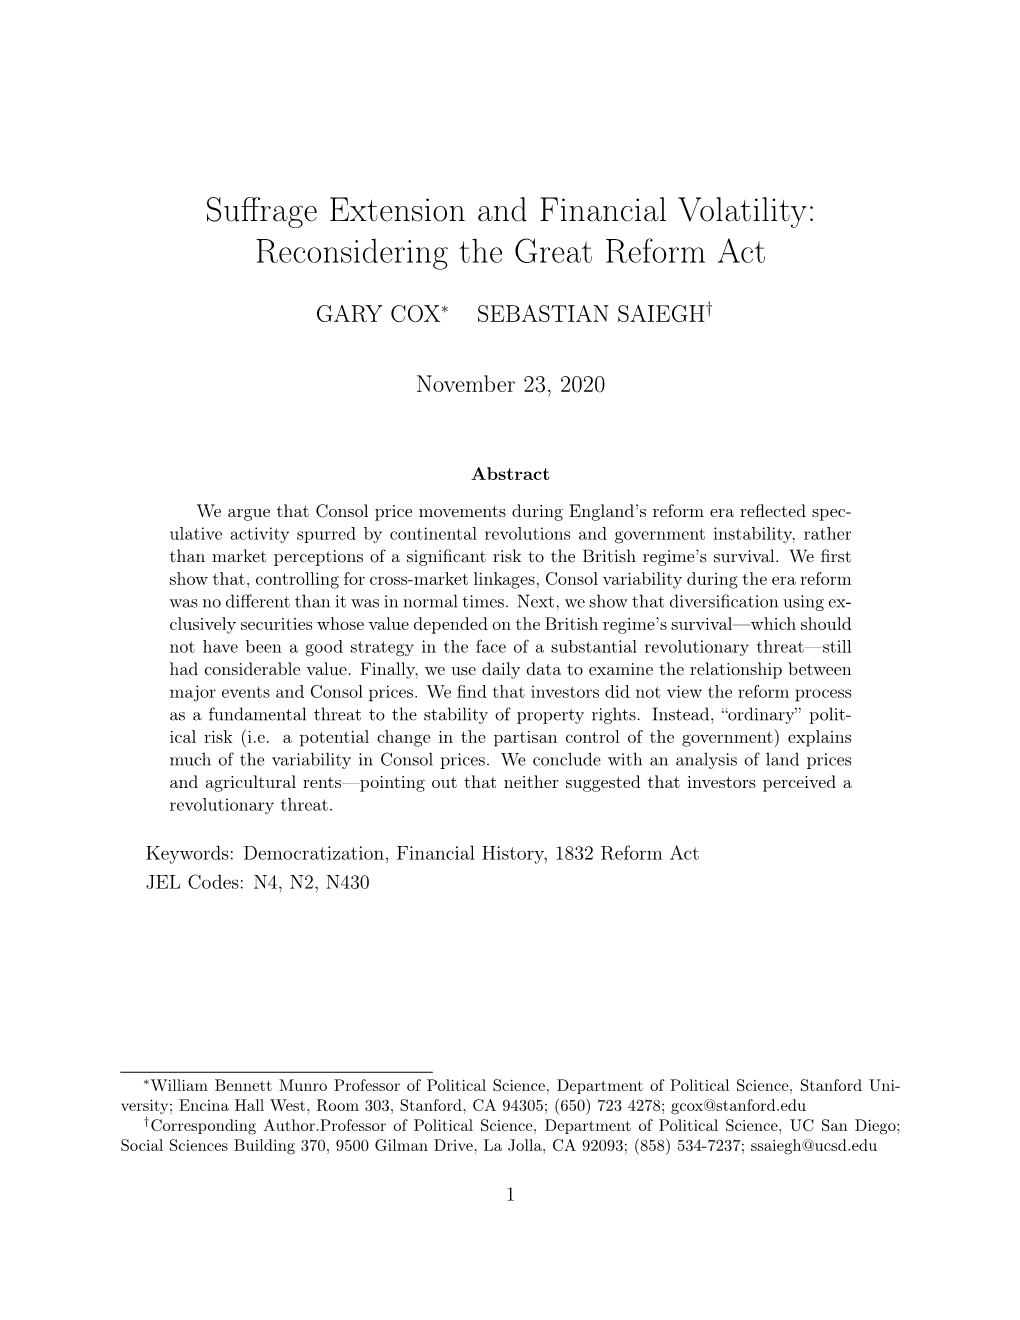 Suffrage Extension and Financial Volatility: Reconsidering the Great